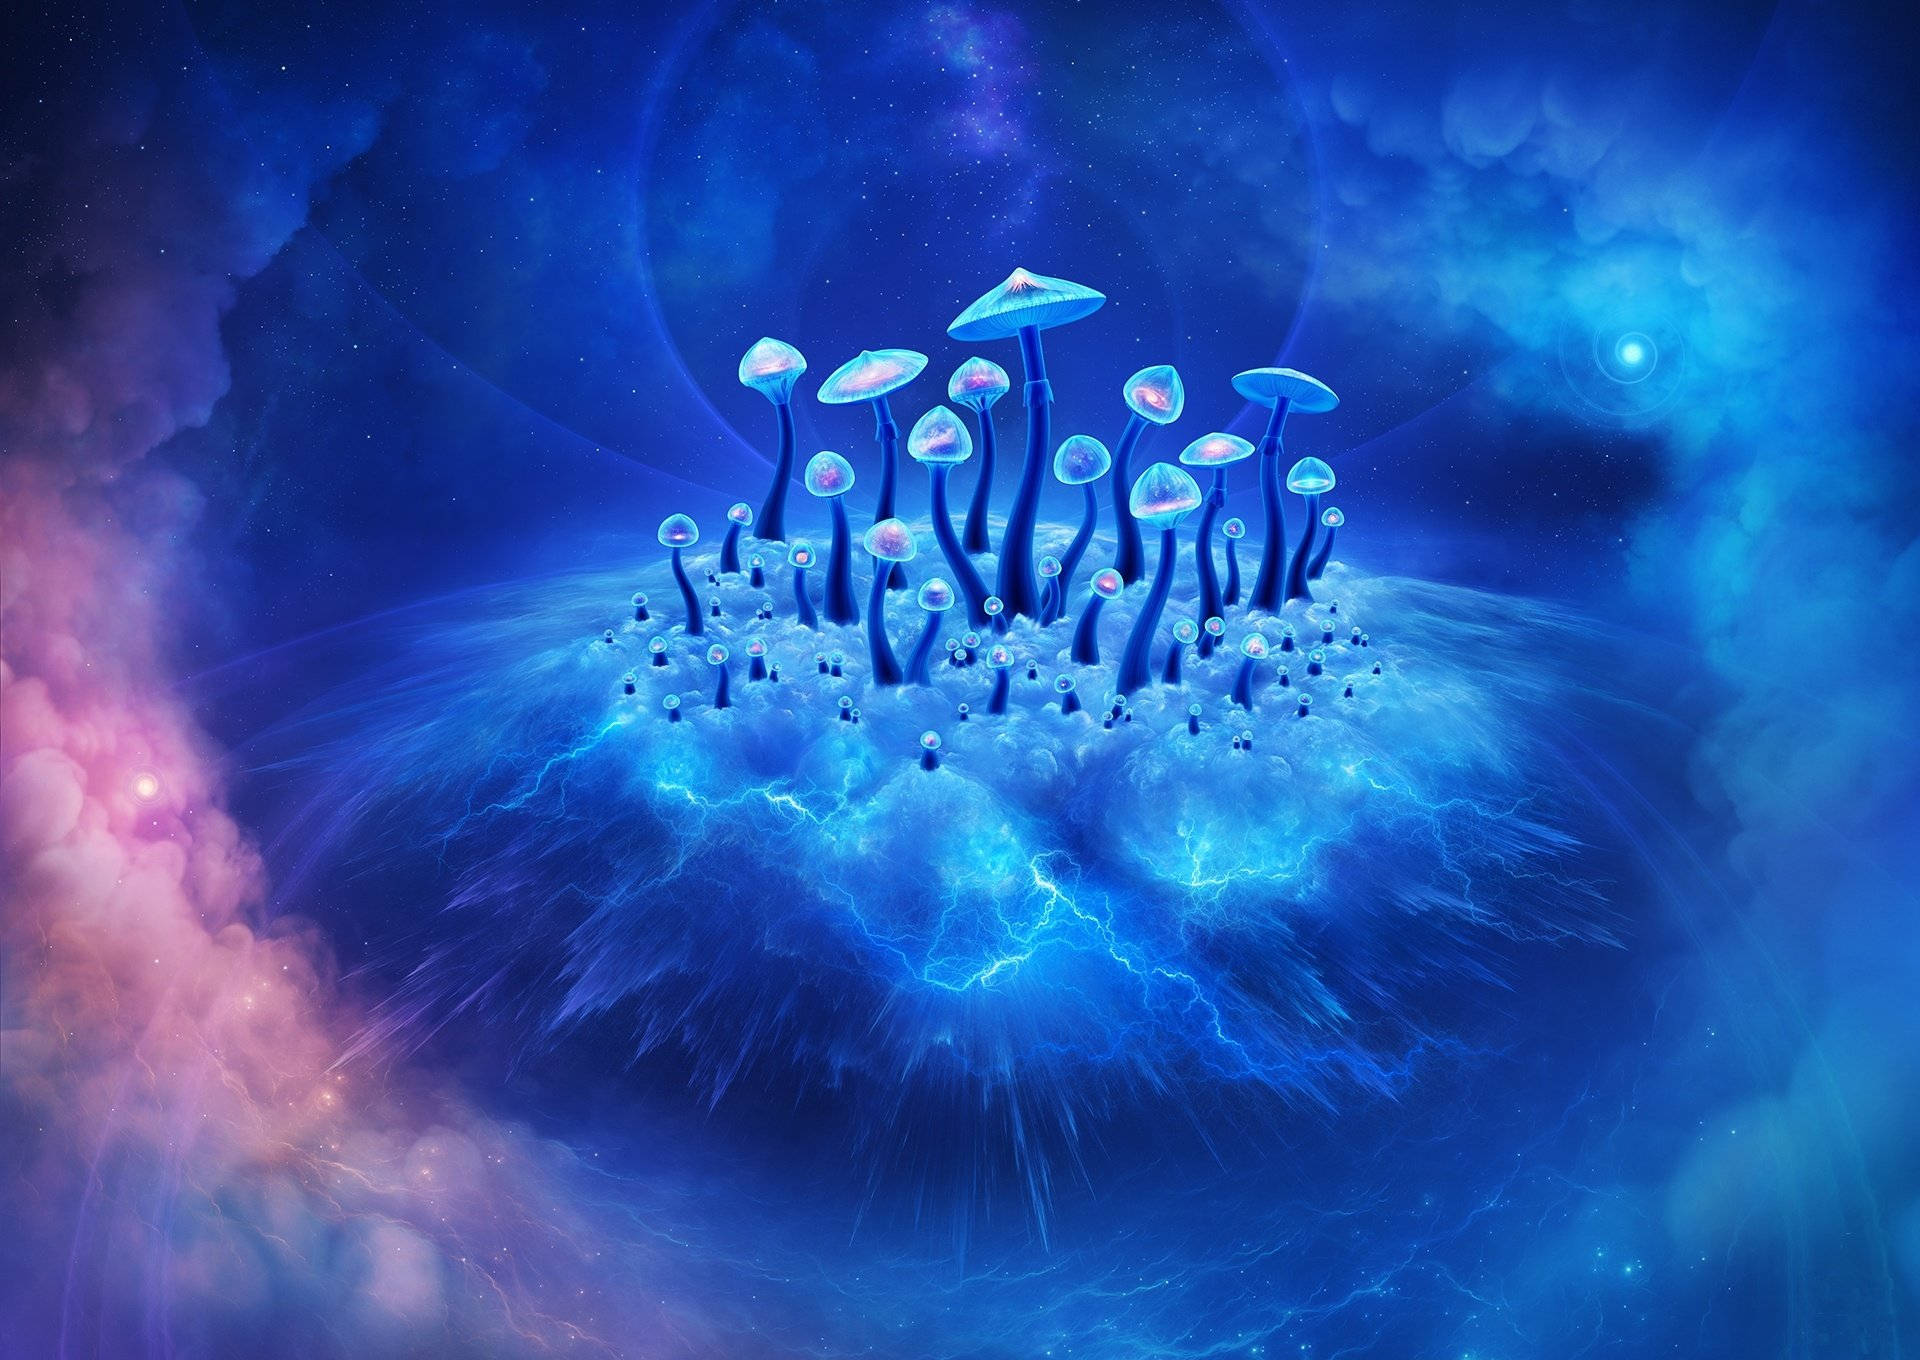 Blue Mushrooms On Psychedelic Cloud Wallpaper